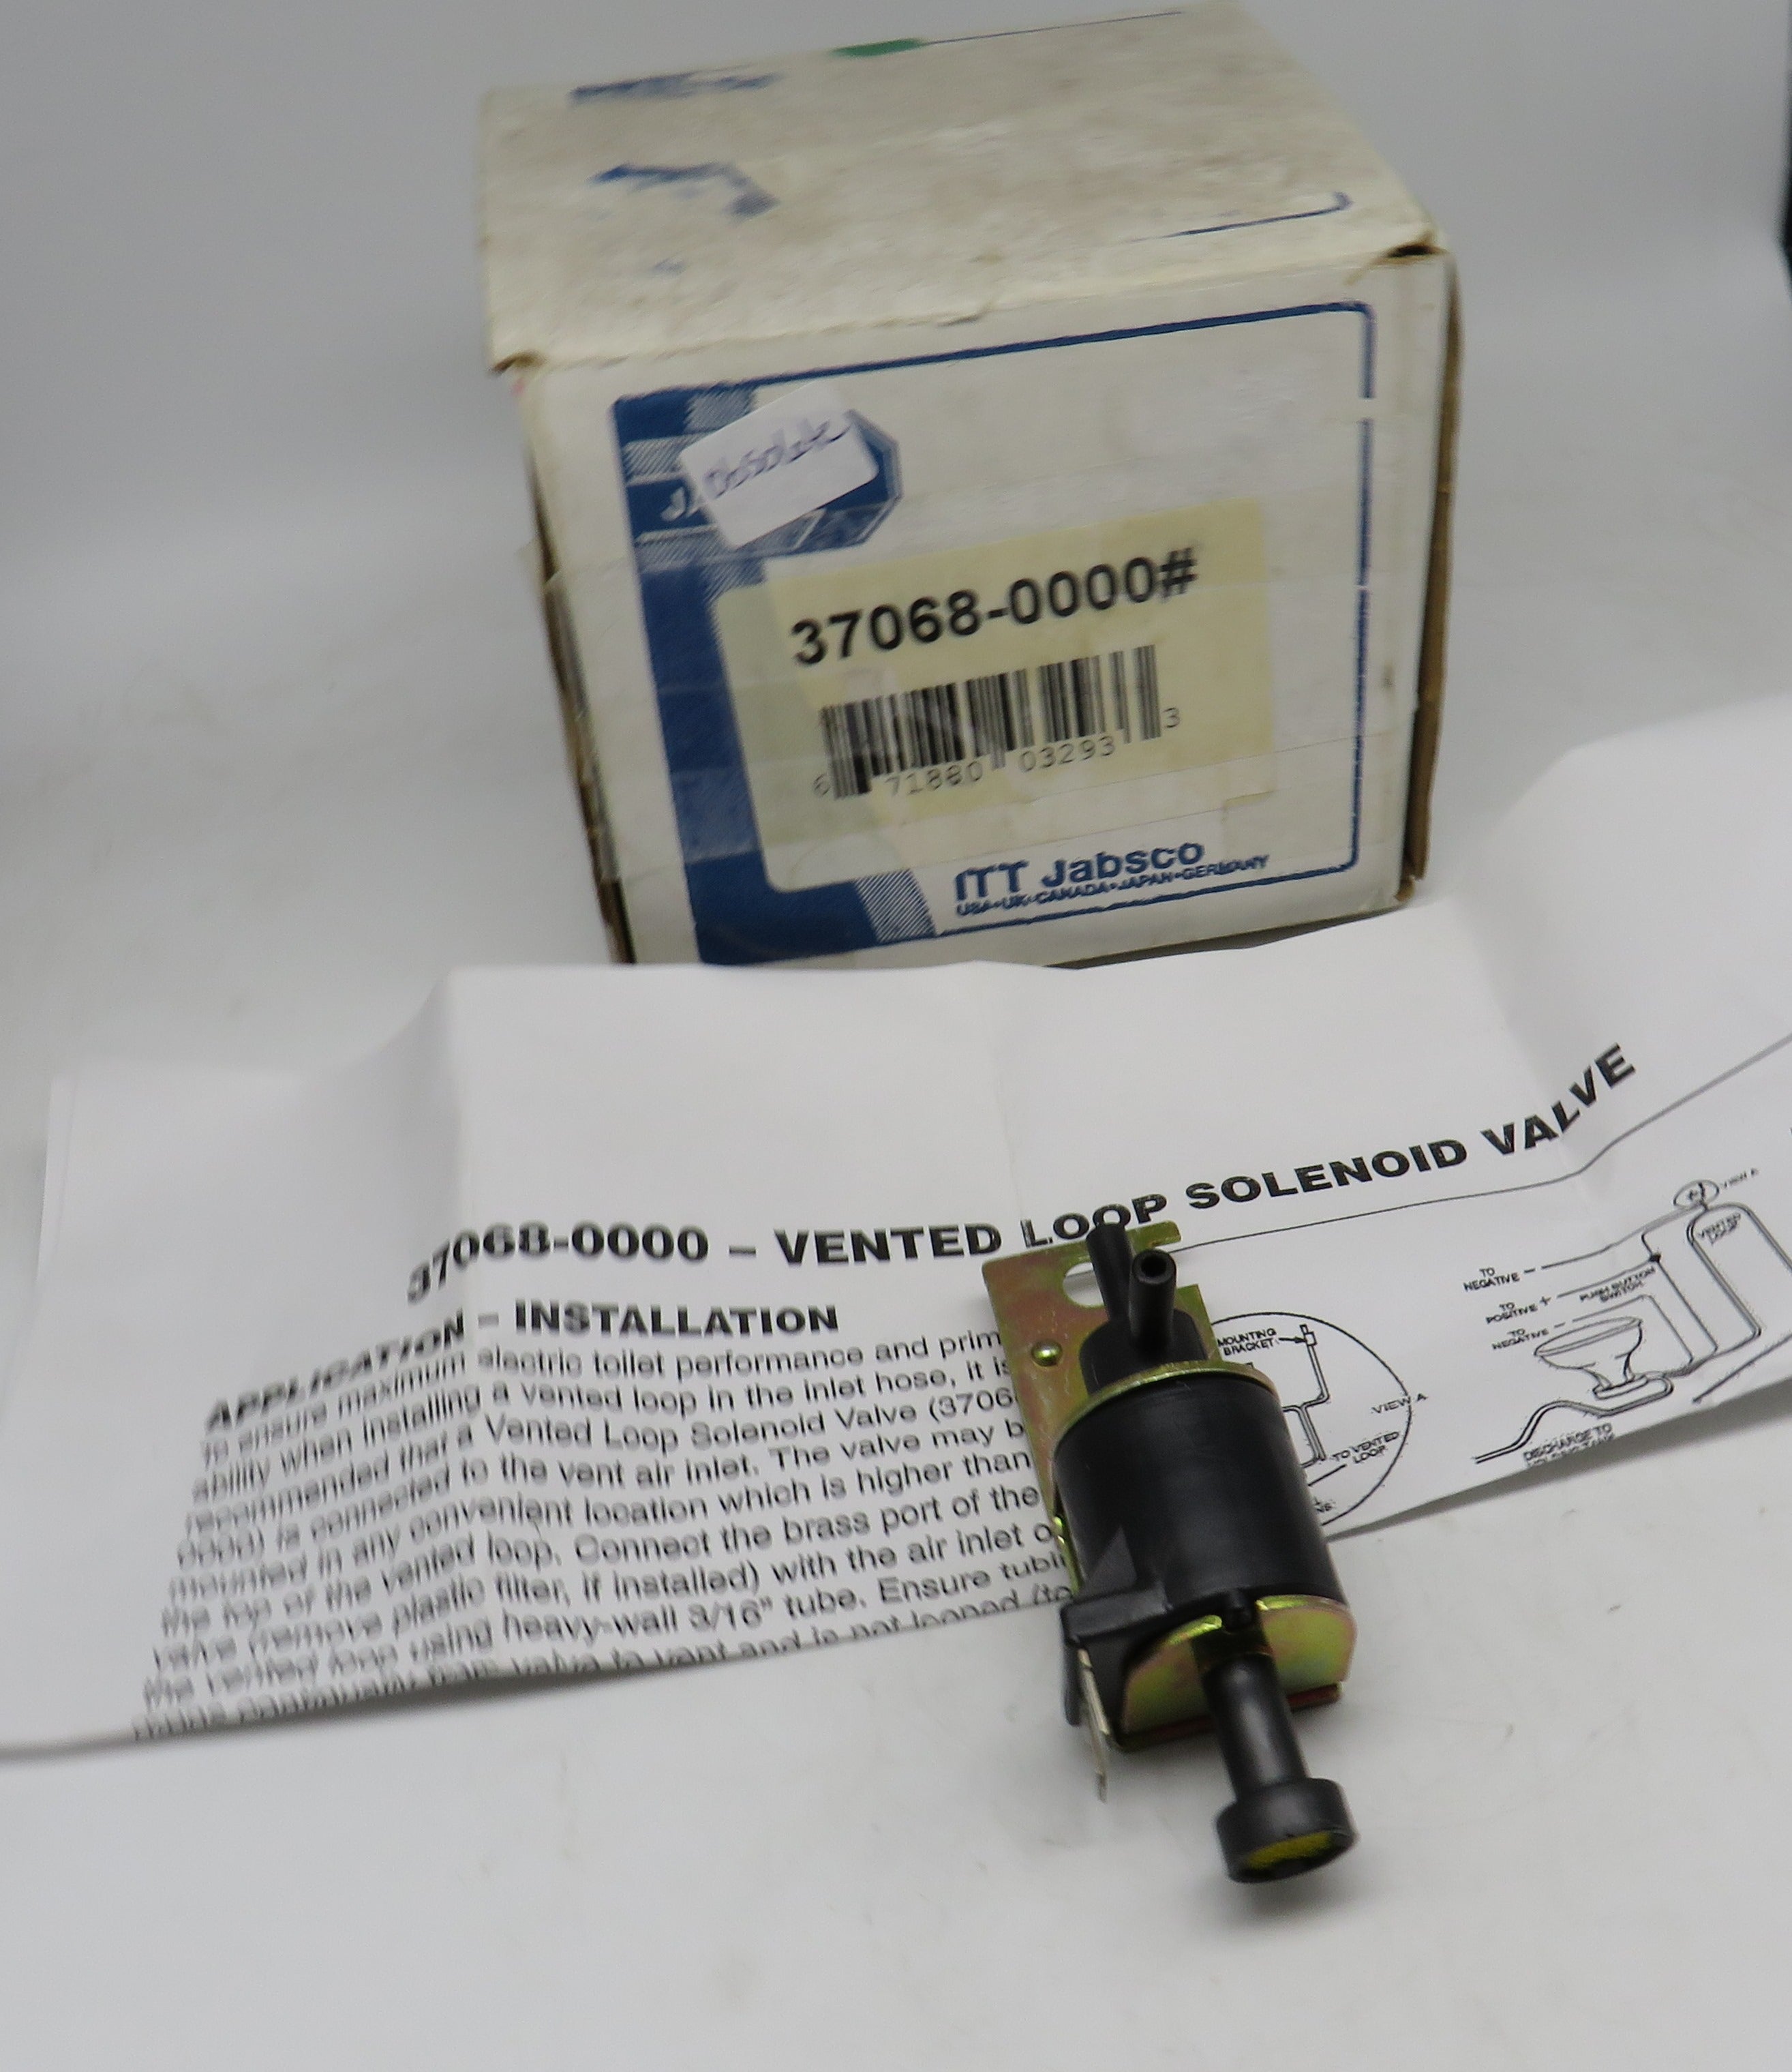 37068-0000 Jabsco Par Vented Loop Solenoid Valve OBSOLETE for Electric Head Replaced by 37068-2000